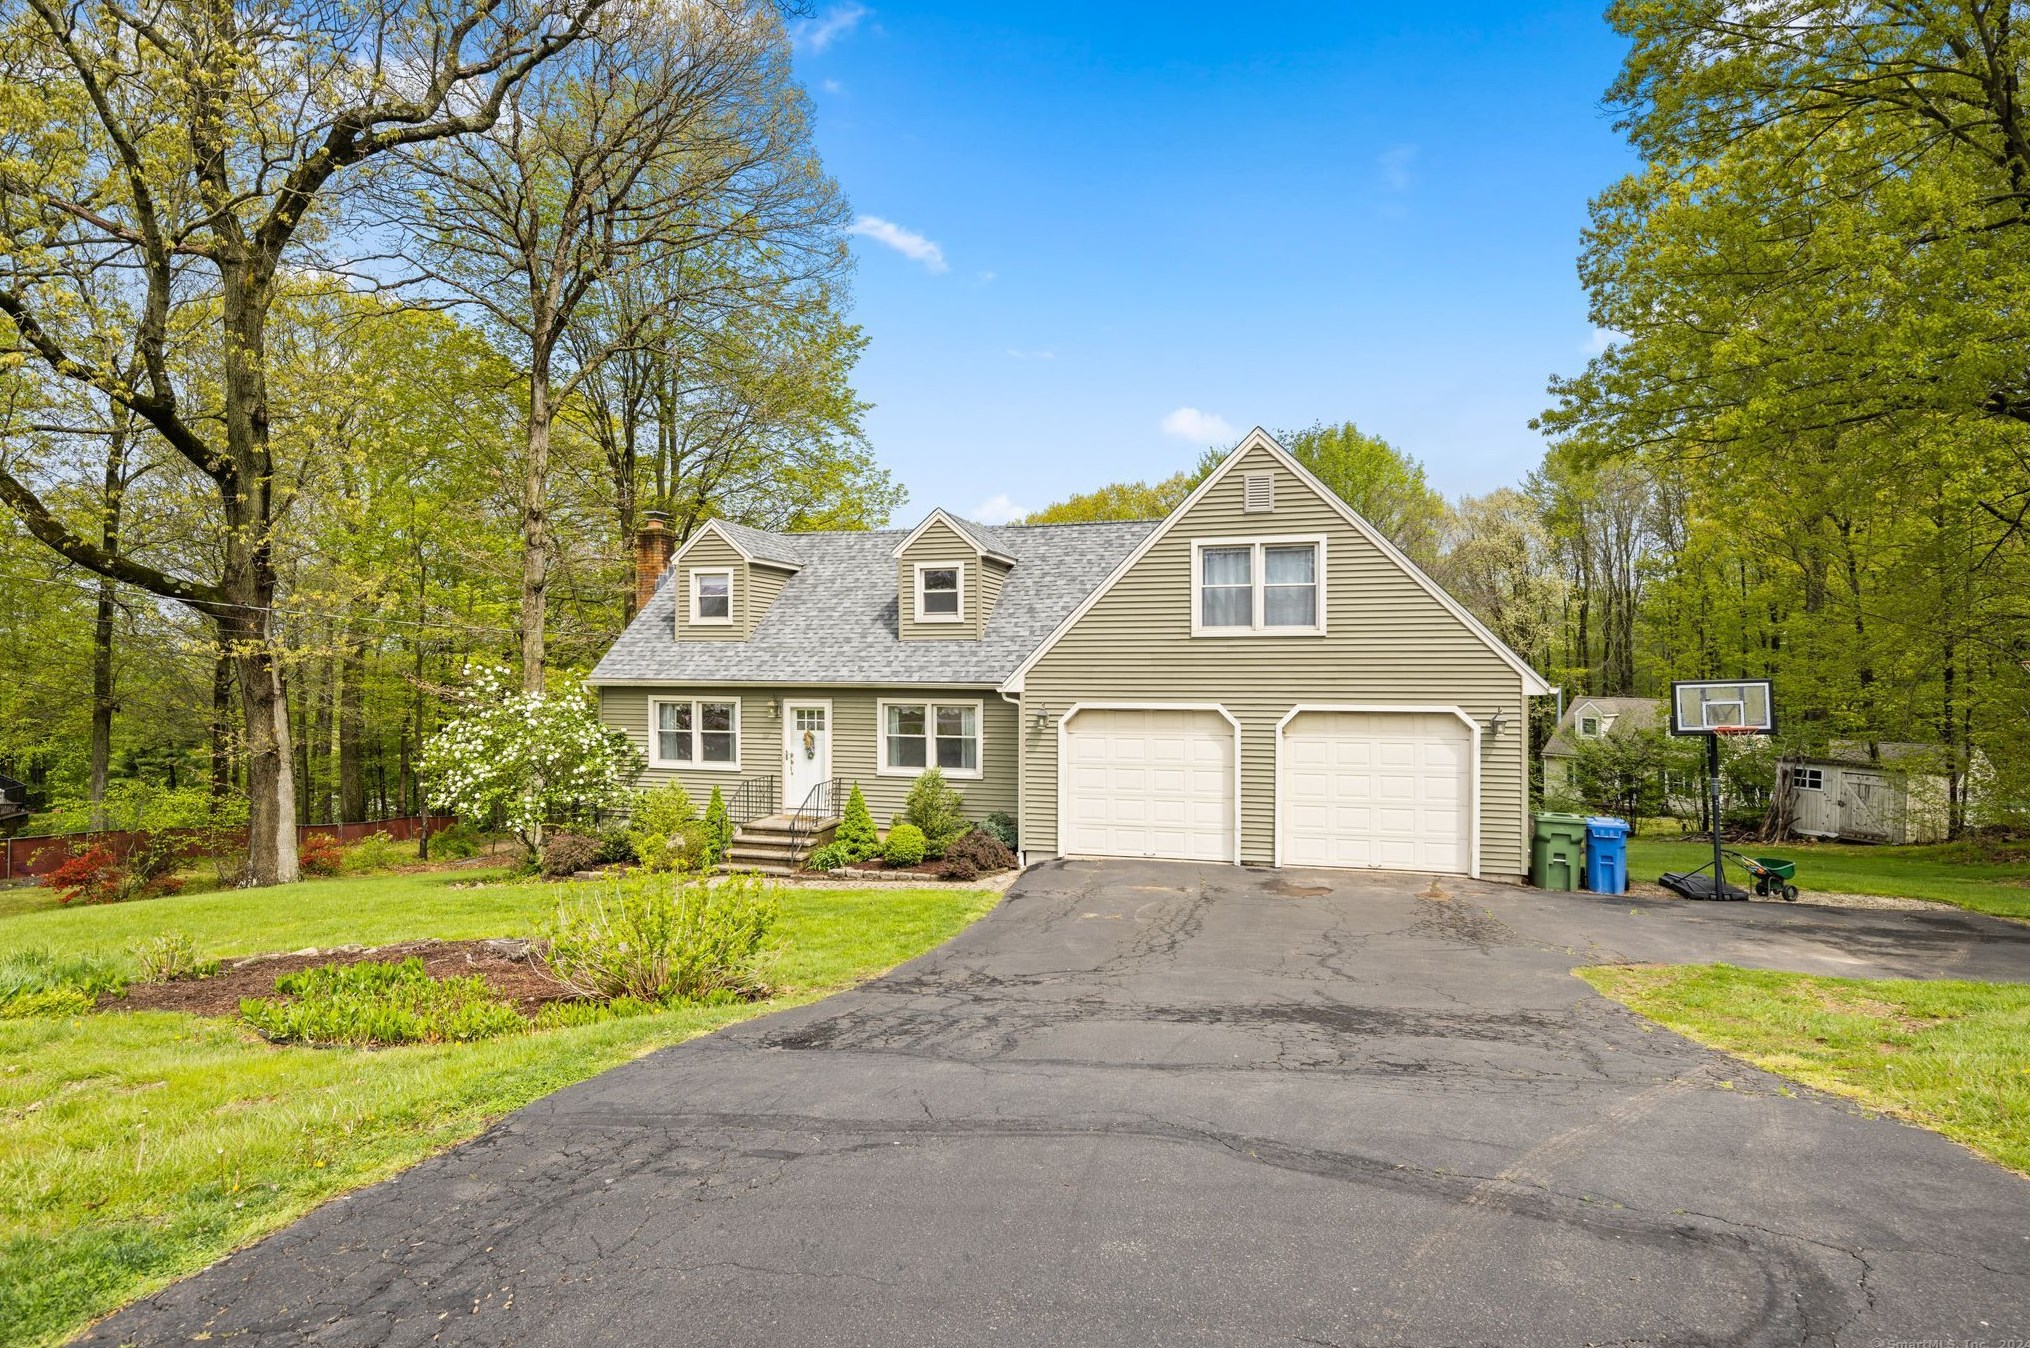 62 Saw Mill Dr, Wallingford, CT 06492